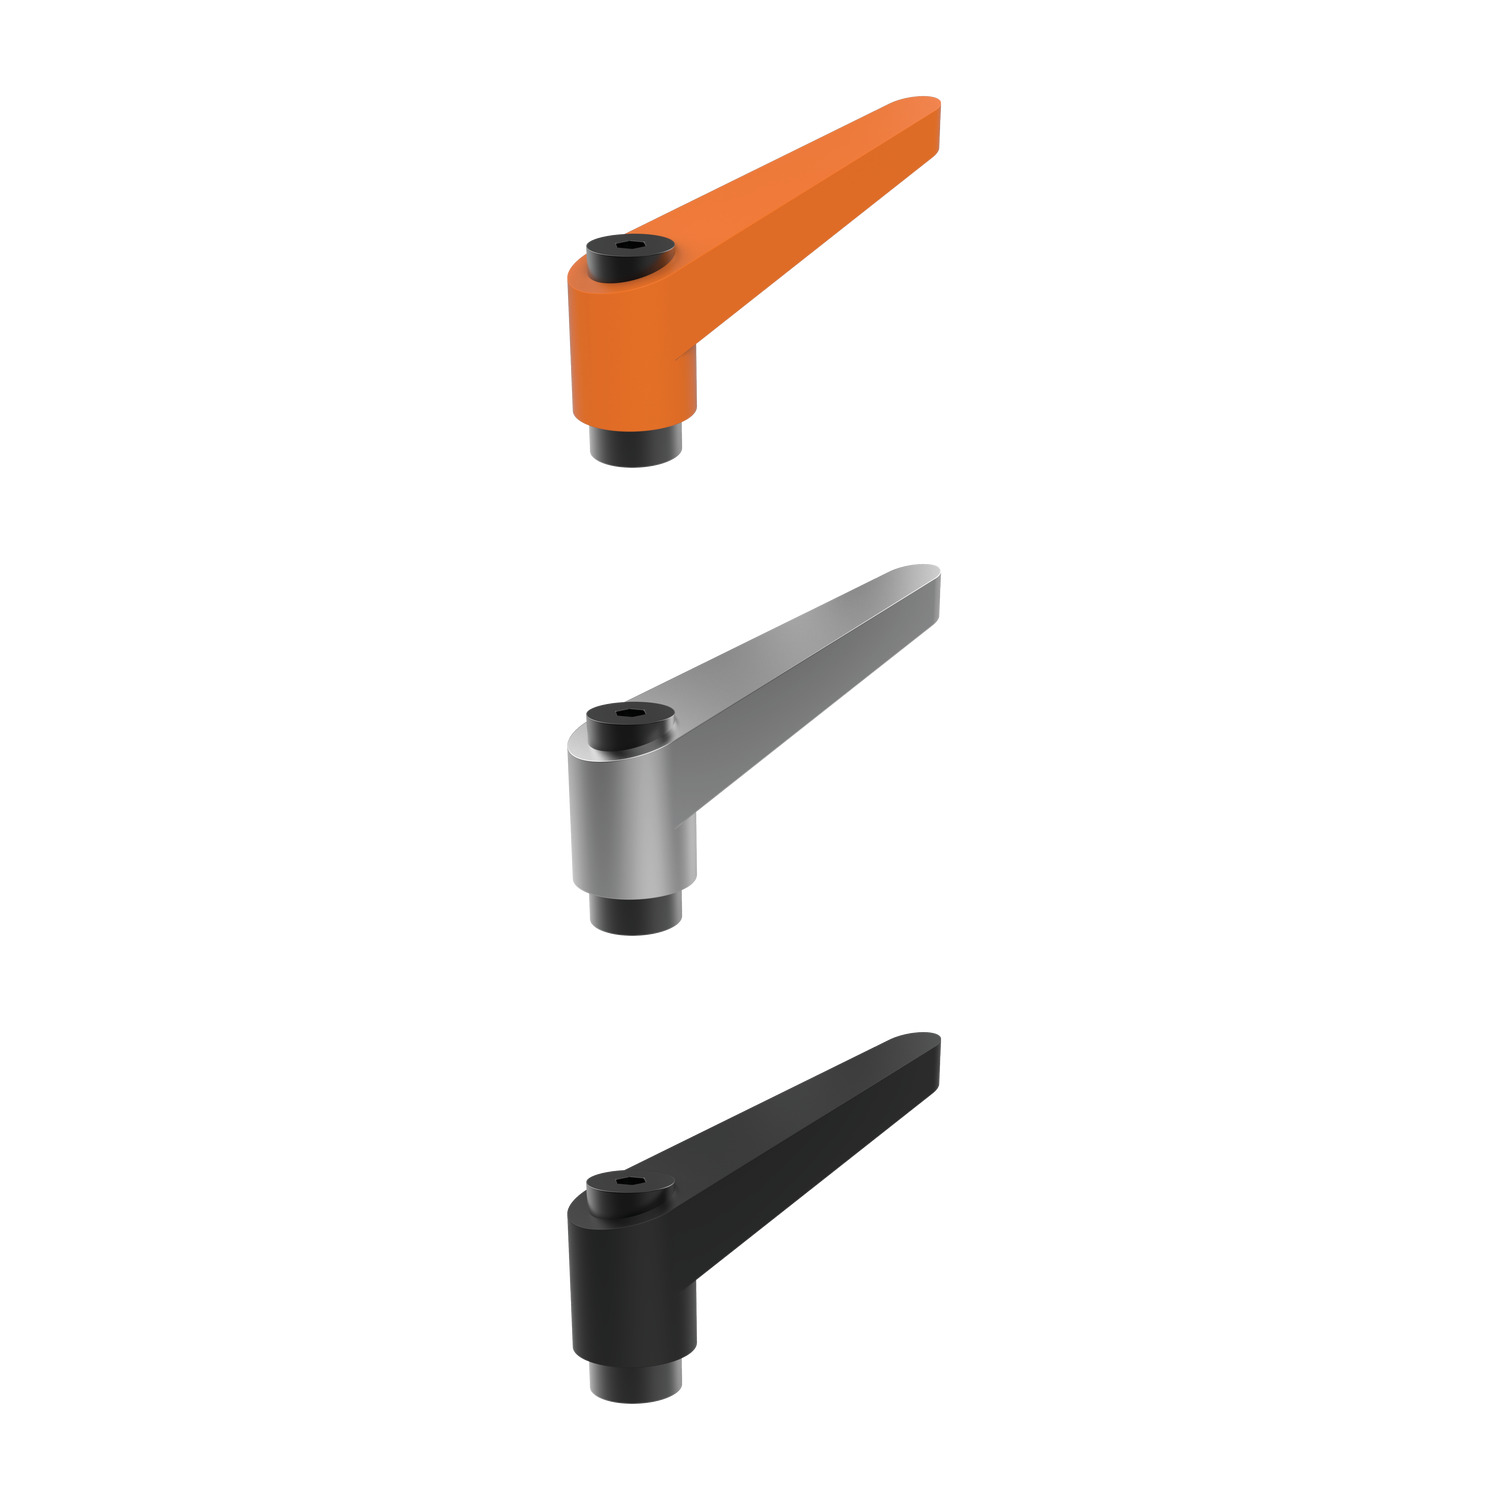 Adjustable Clamping Levers Adjustable clamping levers are available in both male and female and steel and stainless. Coloured handles available.